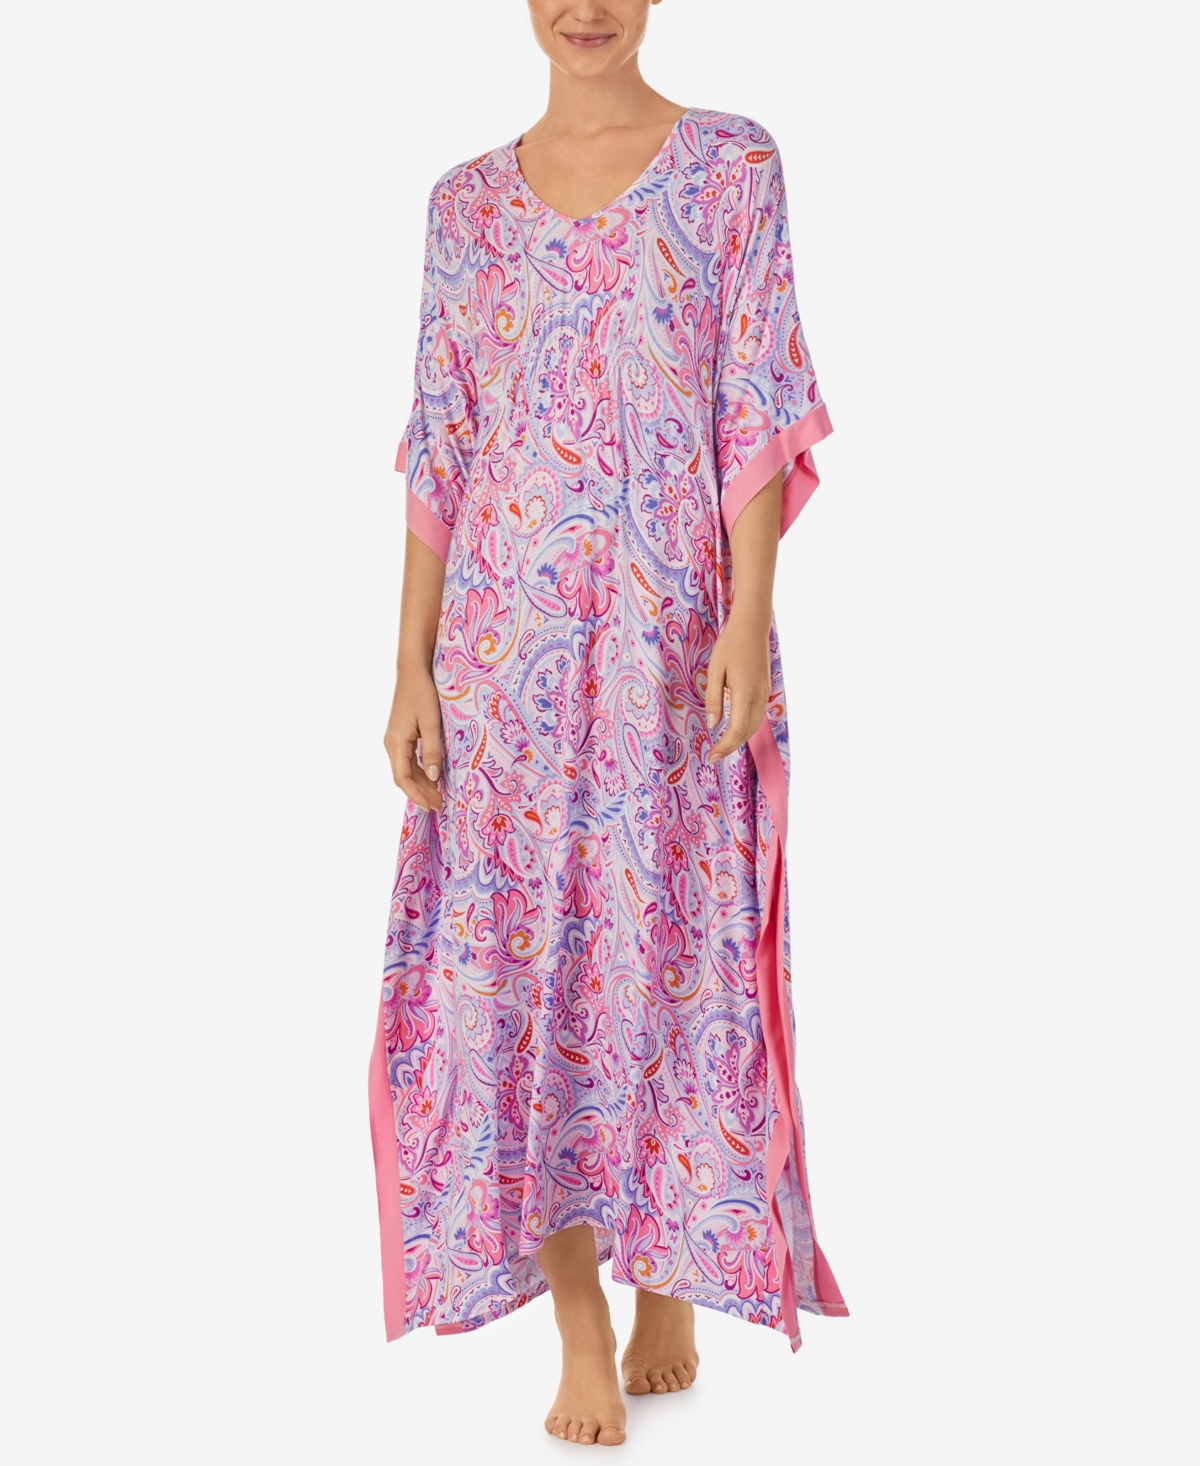 Women's Elbow Sleeve Long Nightgown - Pink Paisley